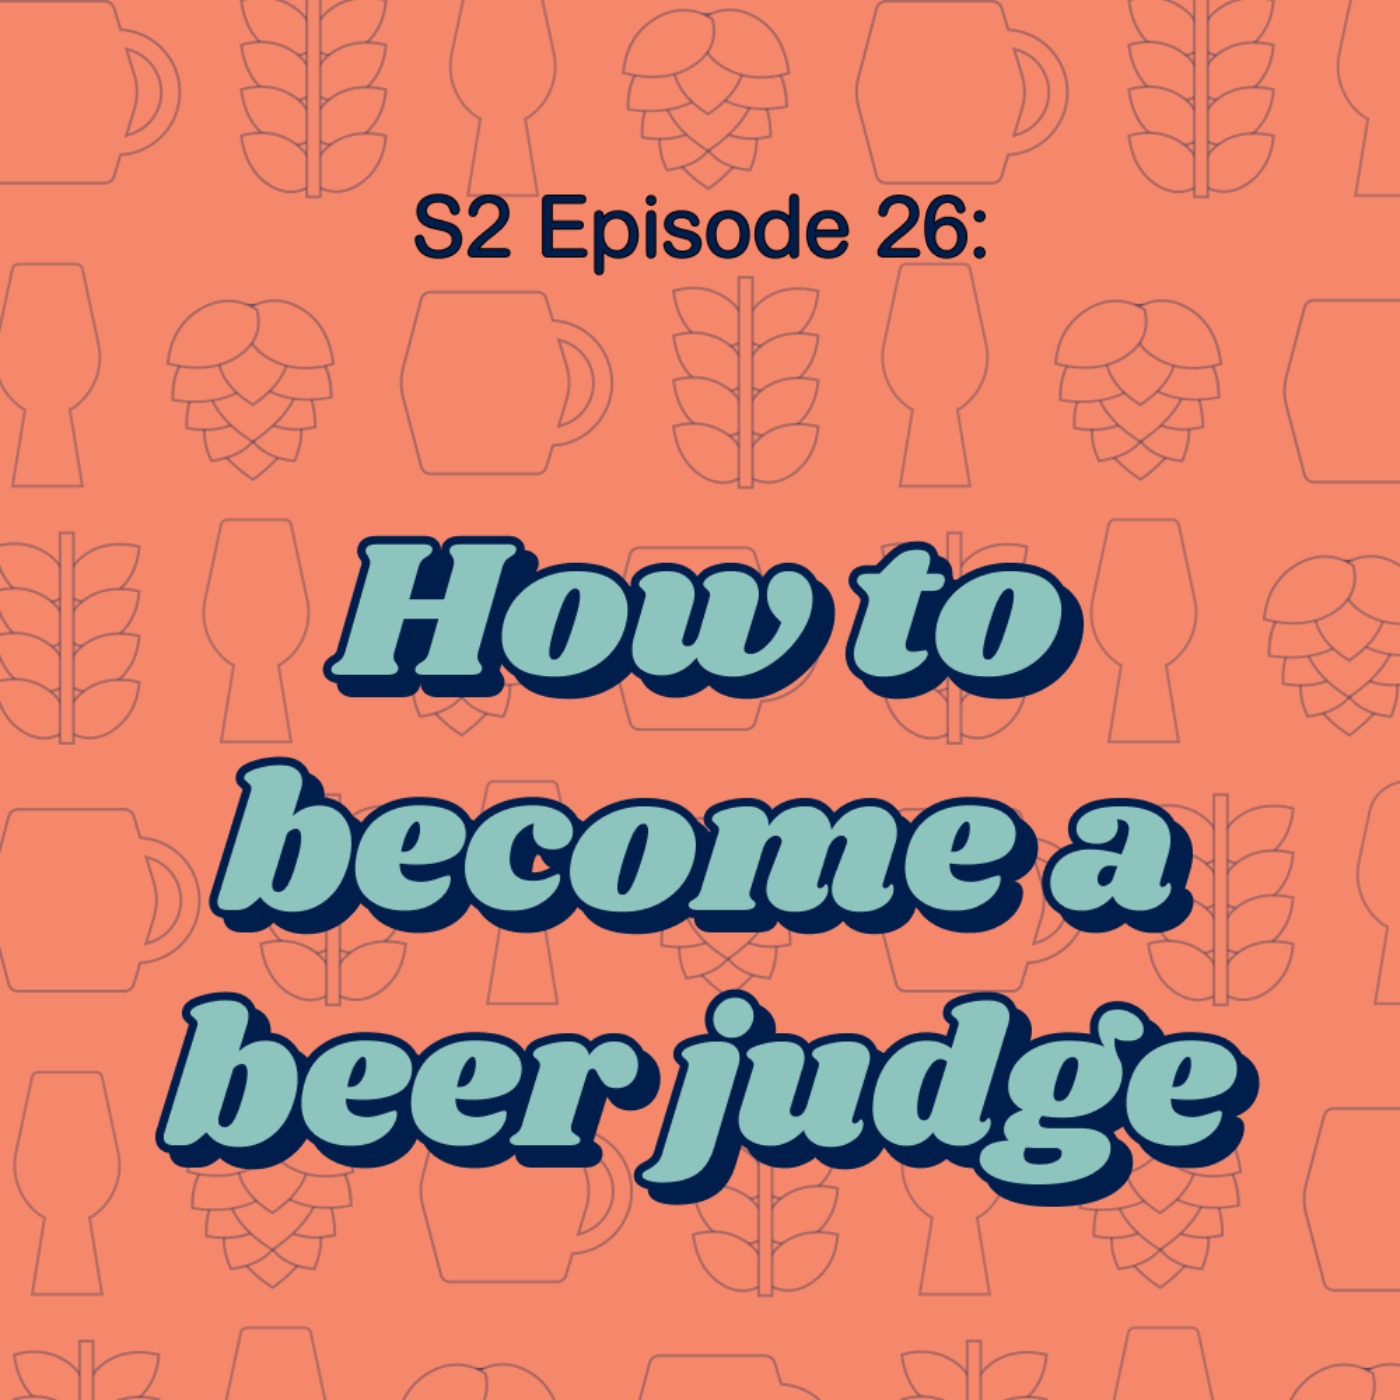 How to become a beer judge